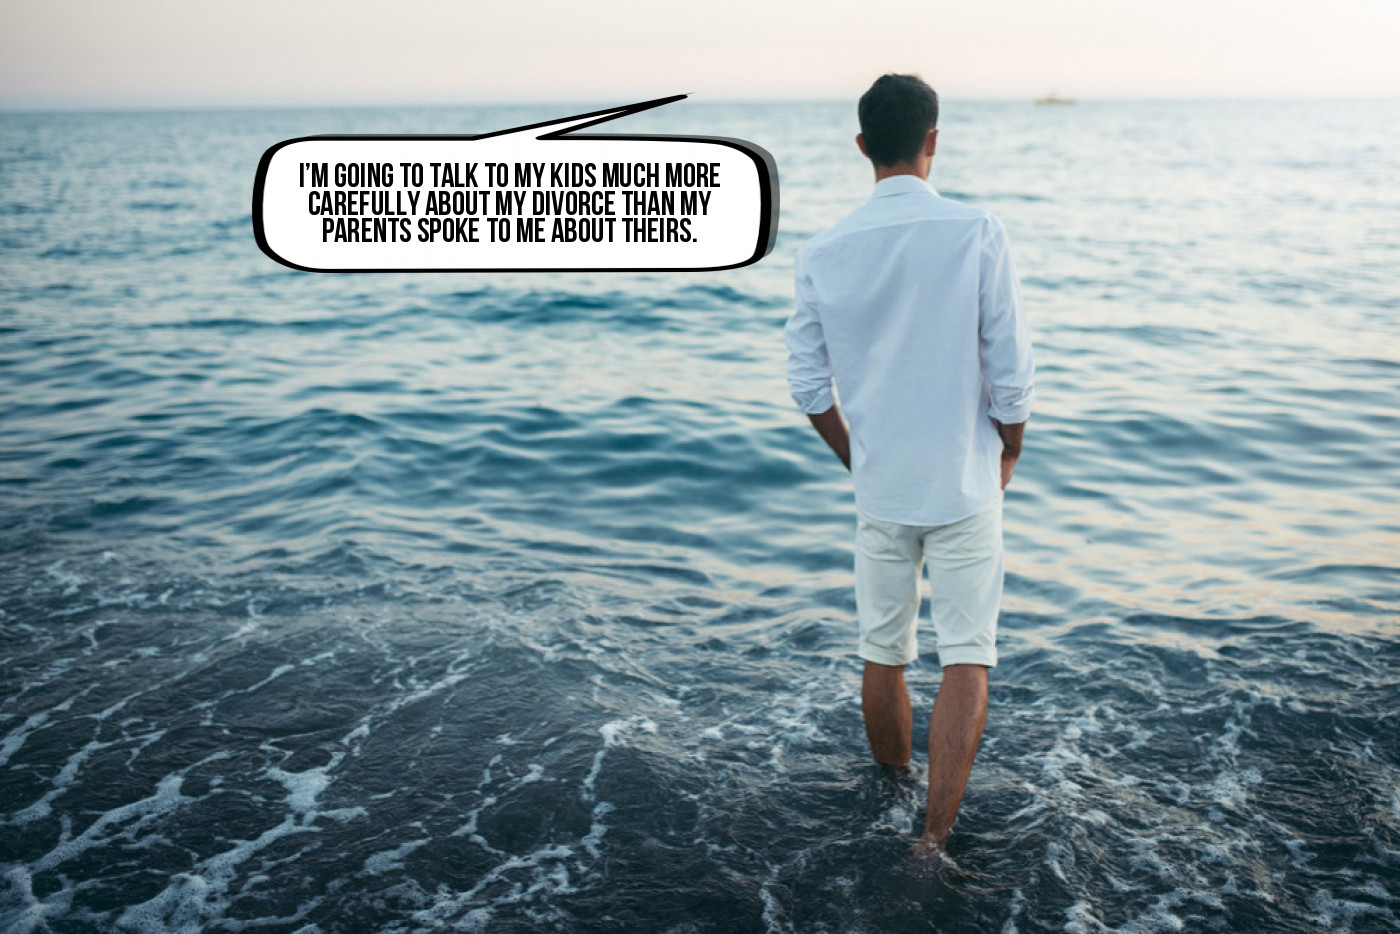 A man standing in the ocean with a speech bubble.